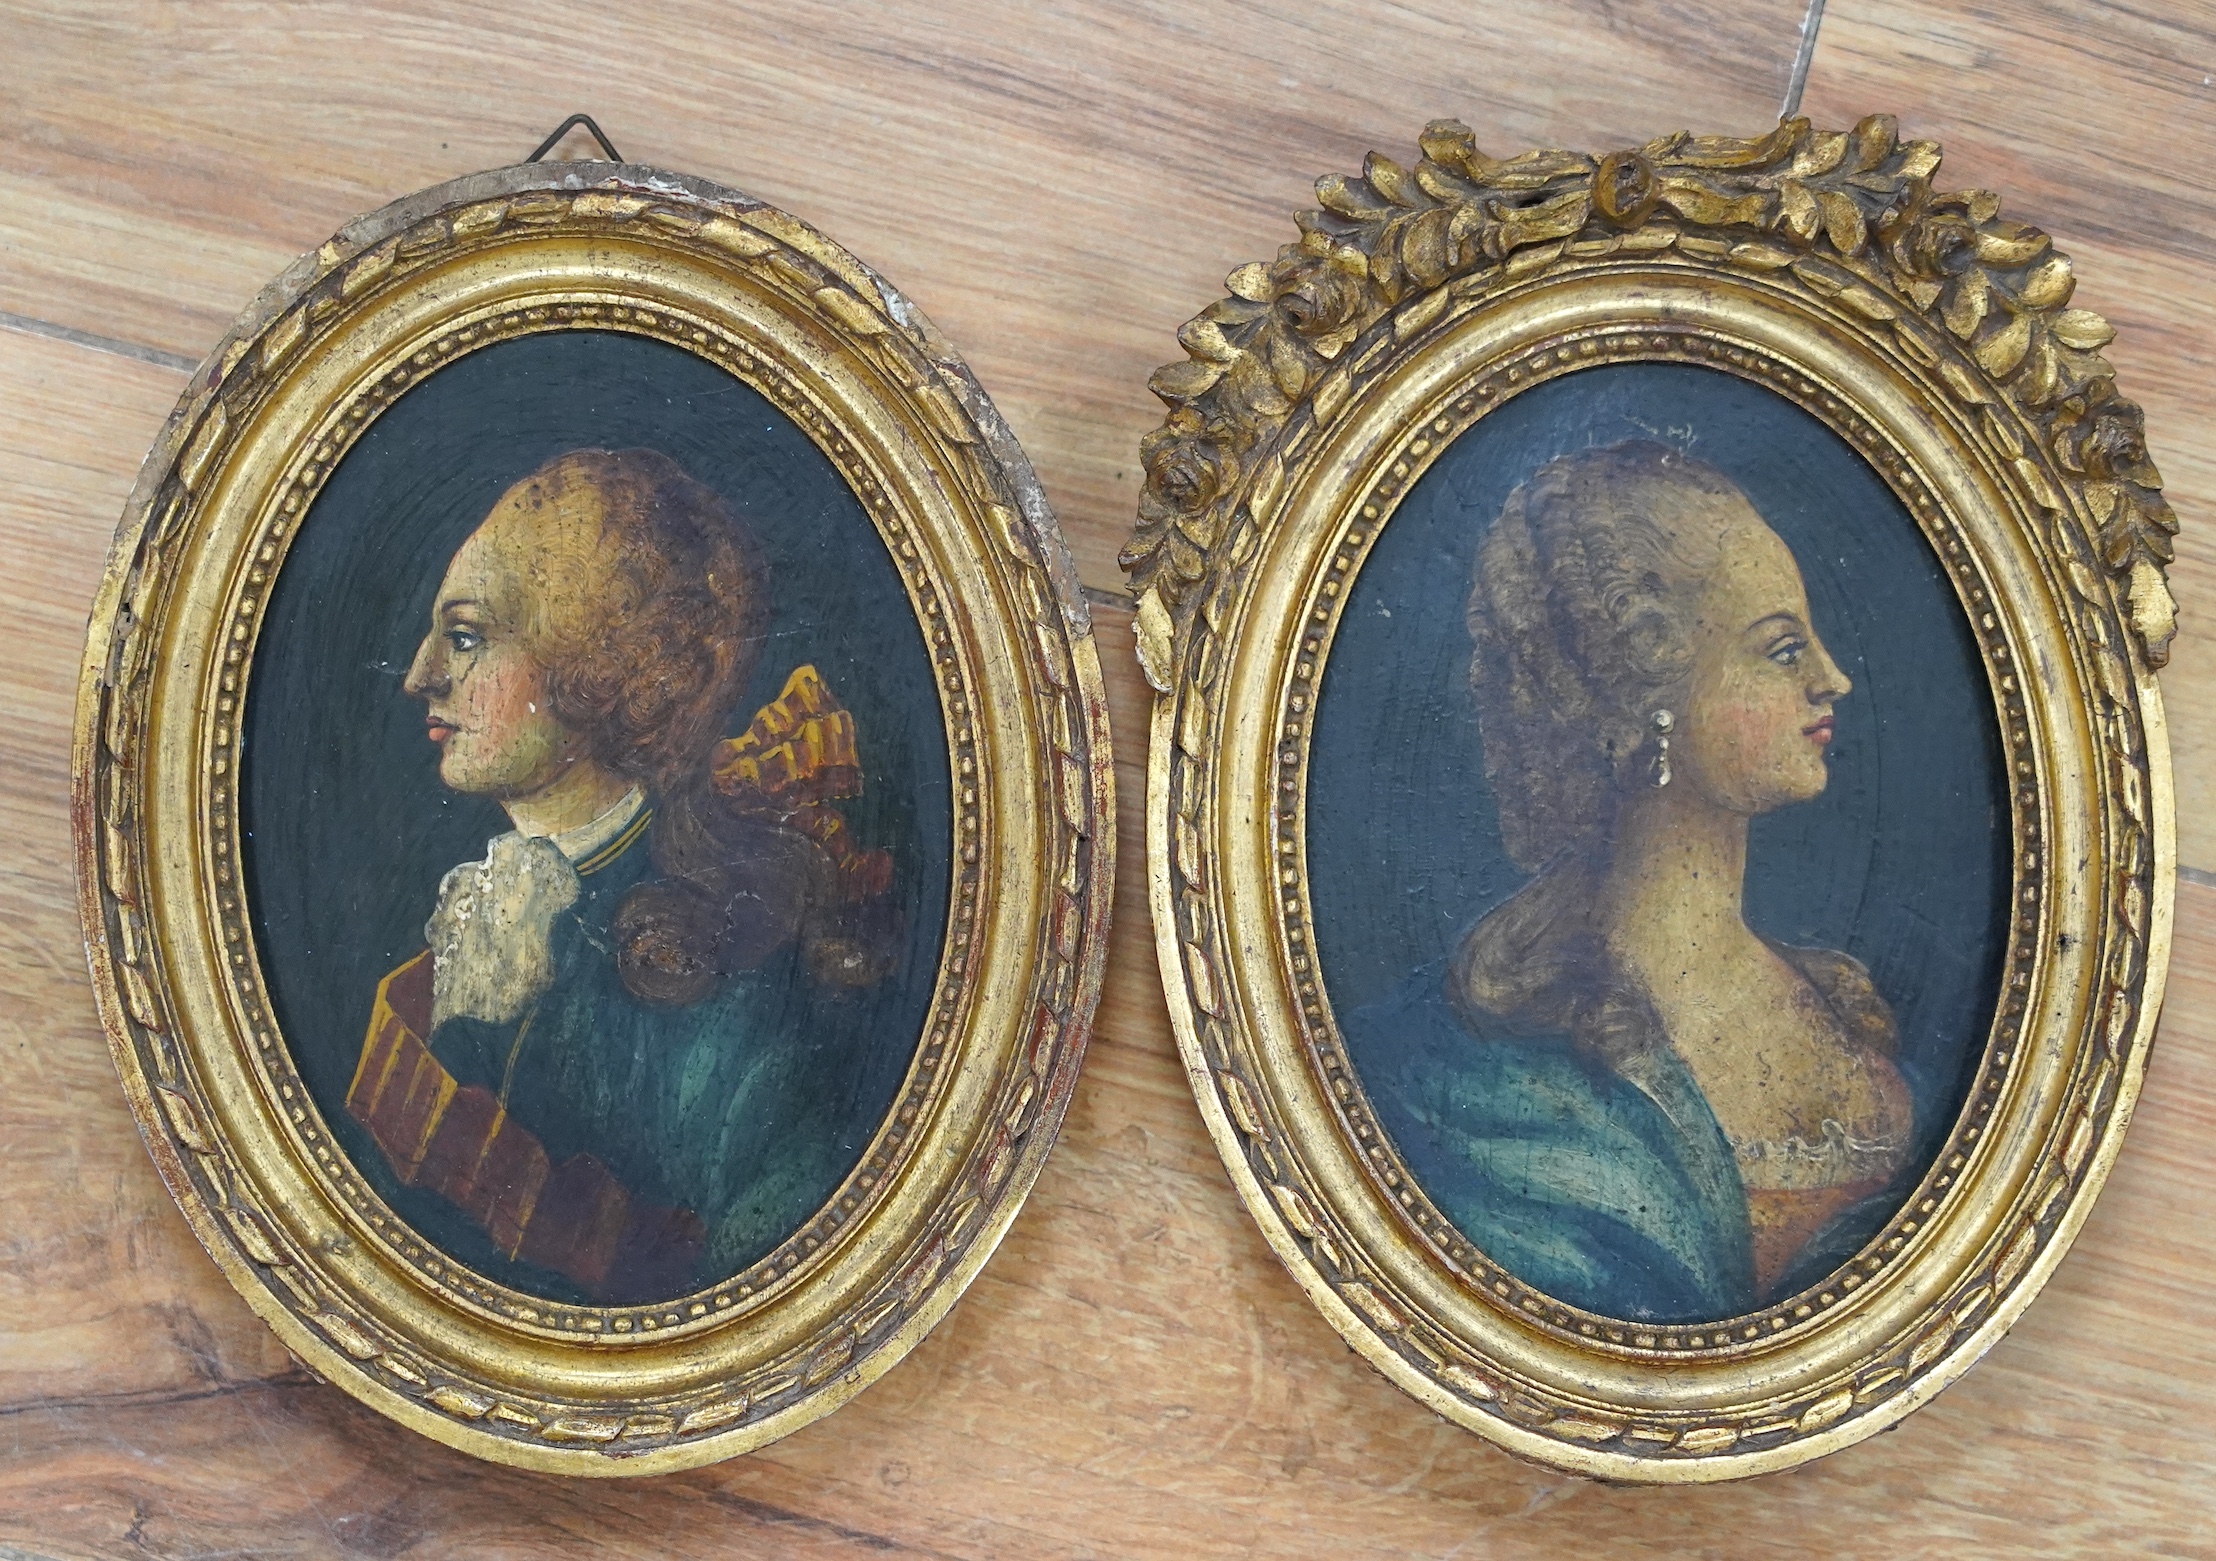 Early 20th century, pair of oval oils on panel, Portraits of a lady and gentleman, 13 x 9cm, housed in ornate gilt frames